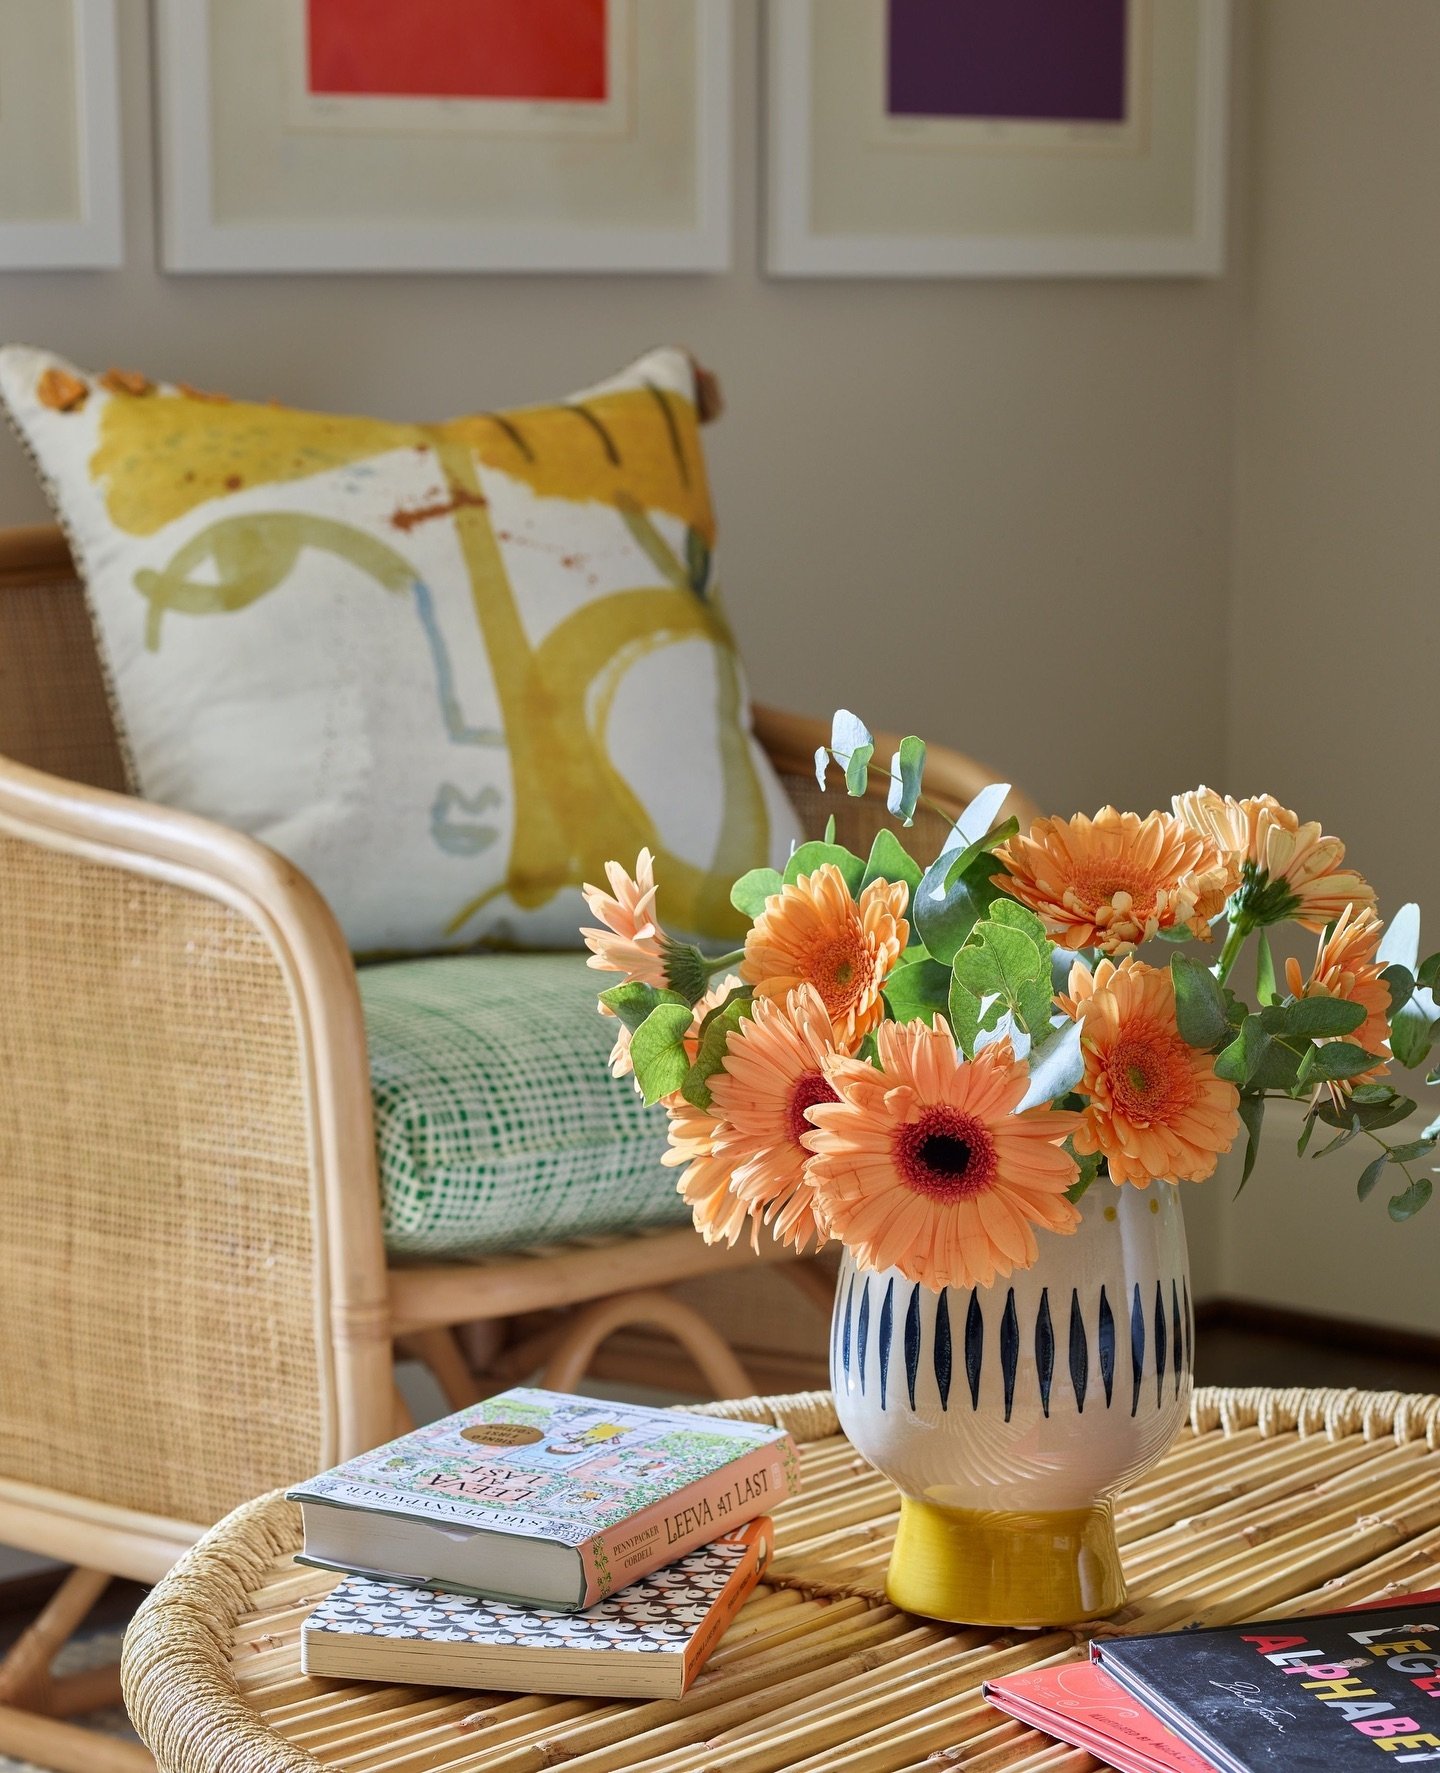 Embracing May with this vibrant palette of yellow-green and citrusy orange. ⁠
⁠
#May #SpringPalette #colorfulinteriors #yellowgreen #citrusorange #mayinspiration #vibrantspaces #buckheadbeauty